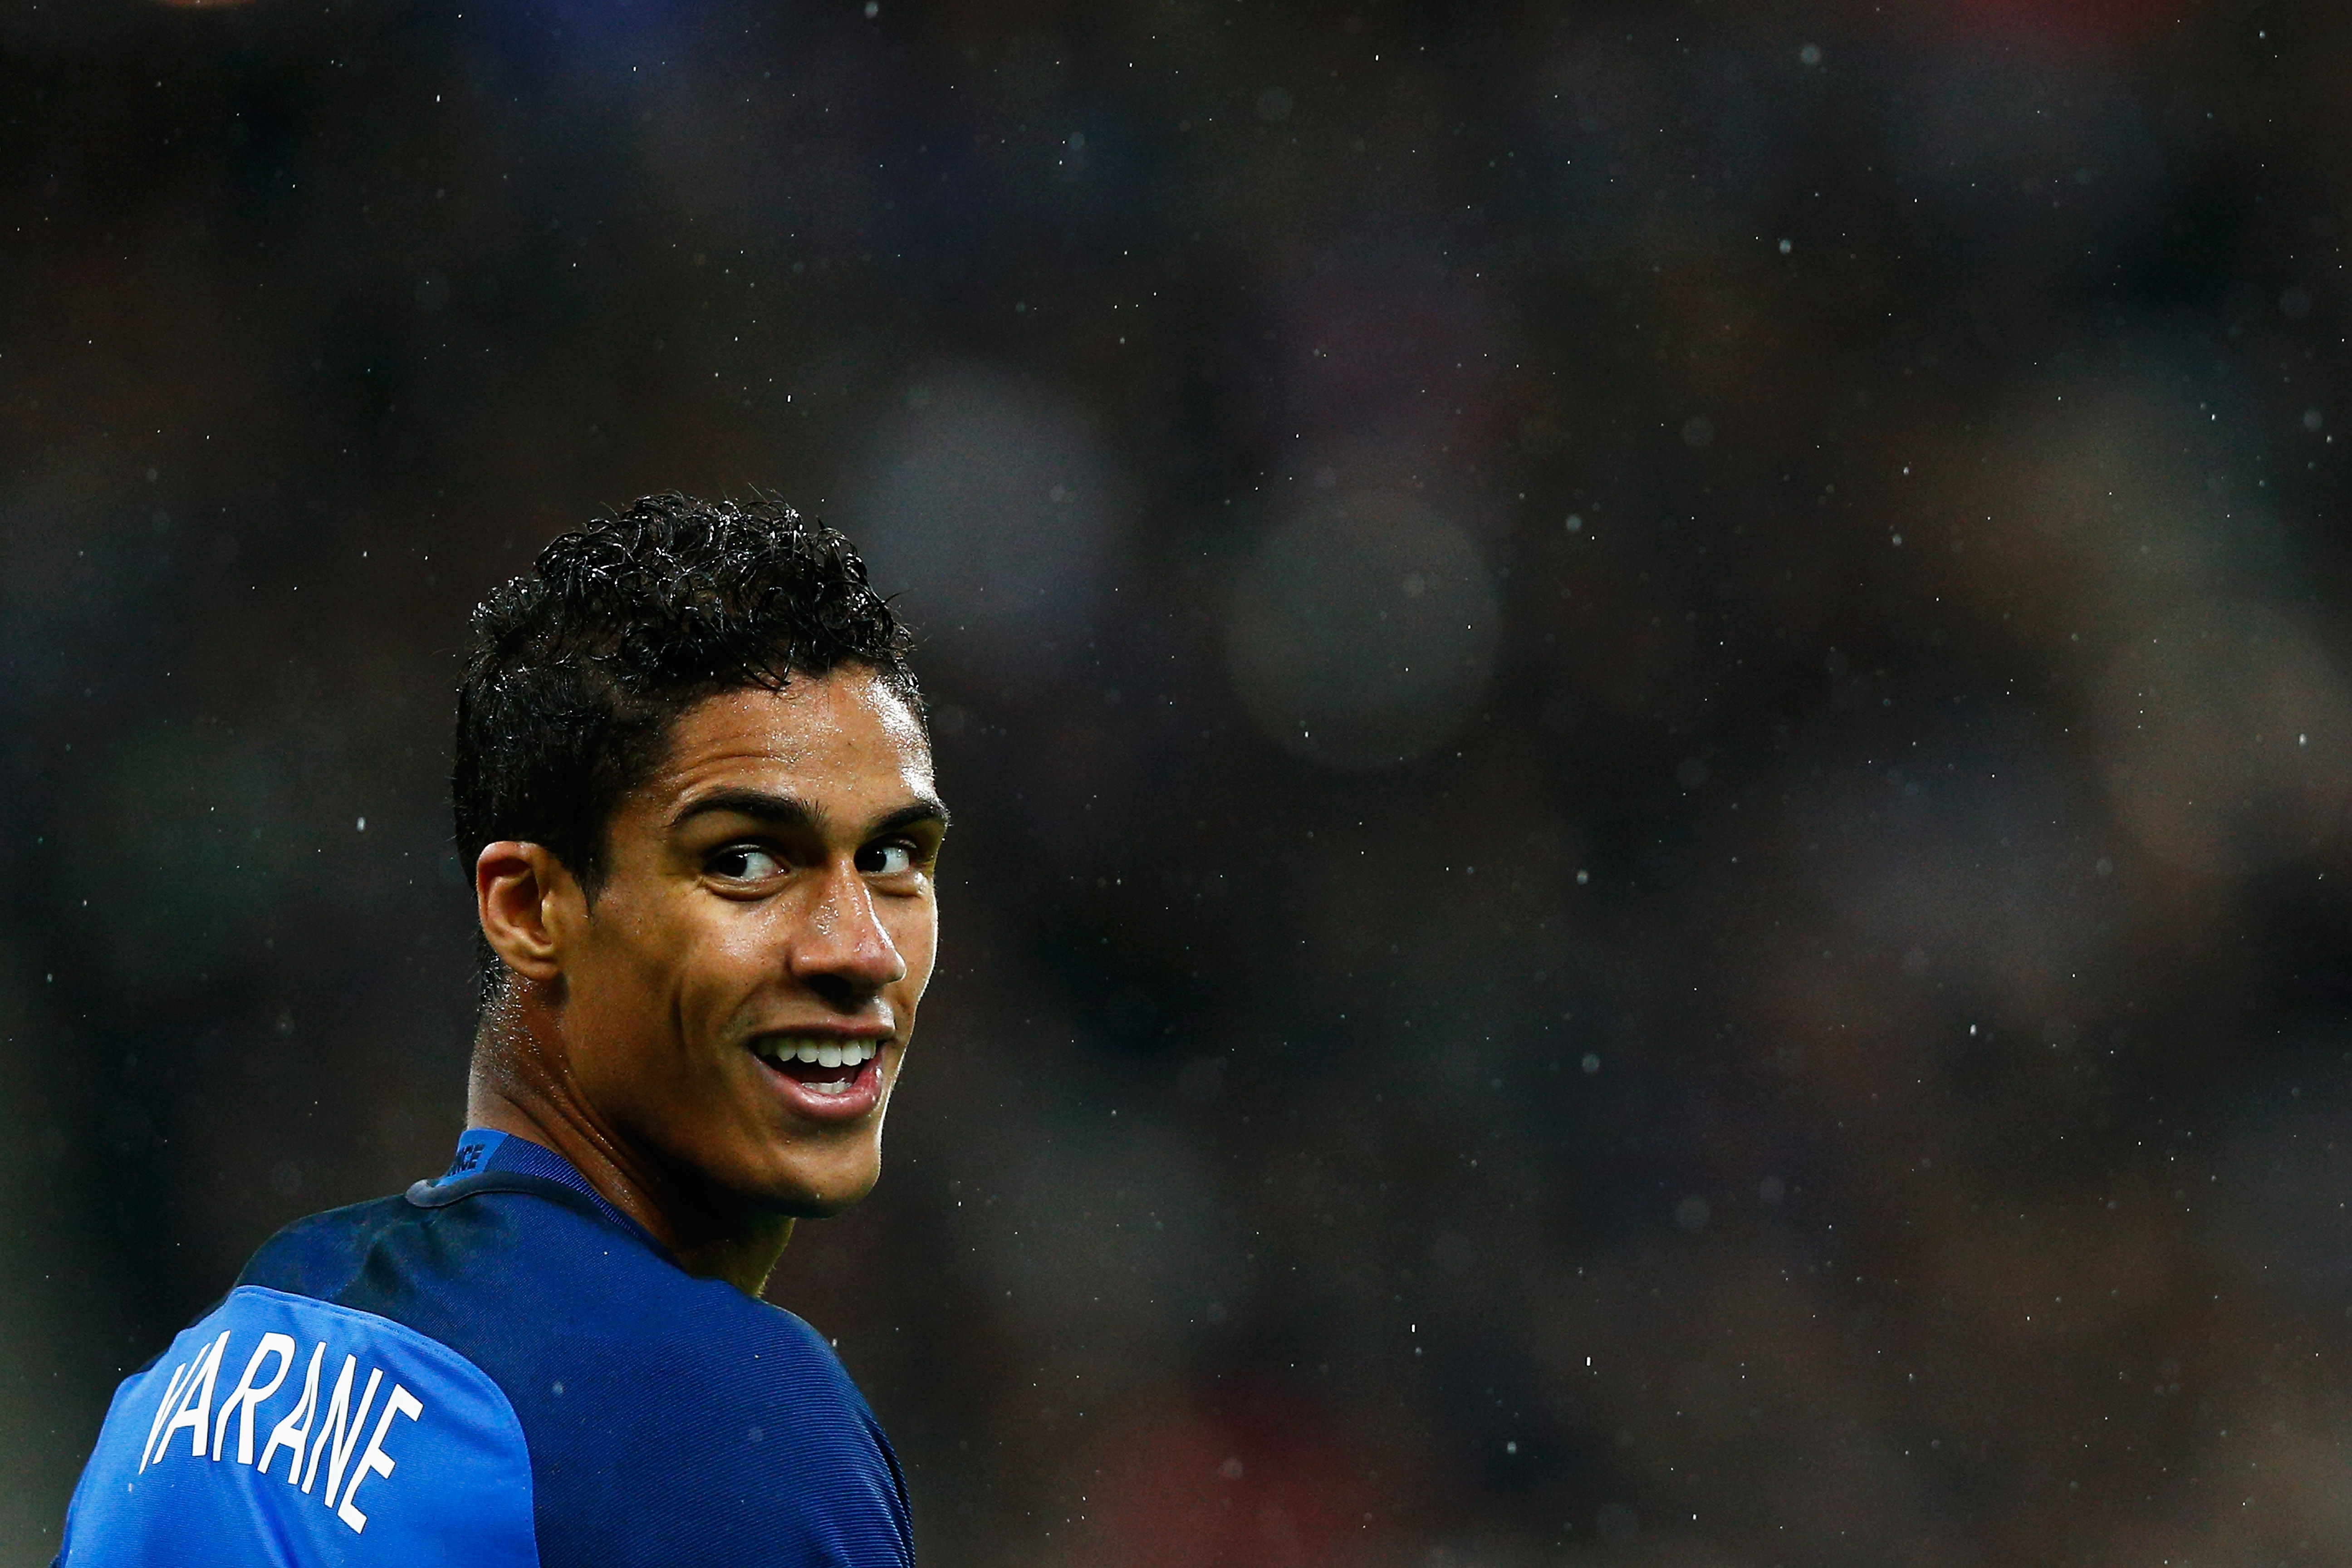 PARIS, FRANCE - MARCH 29:  Raphael Varane of France looks on during the International Friendly match between France and Russia held at Stade de France on March 29, 2016 in Paris, France.  (Photo by Dean Mouhtaropoulos/Getty Images)